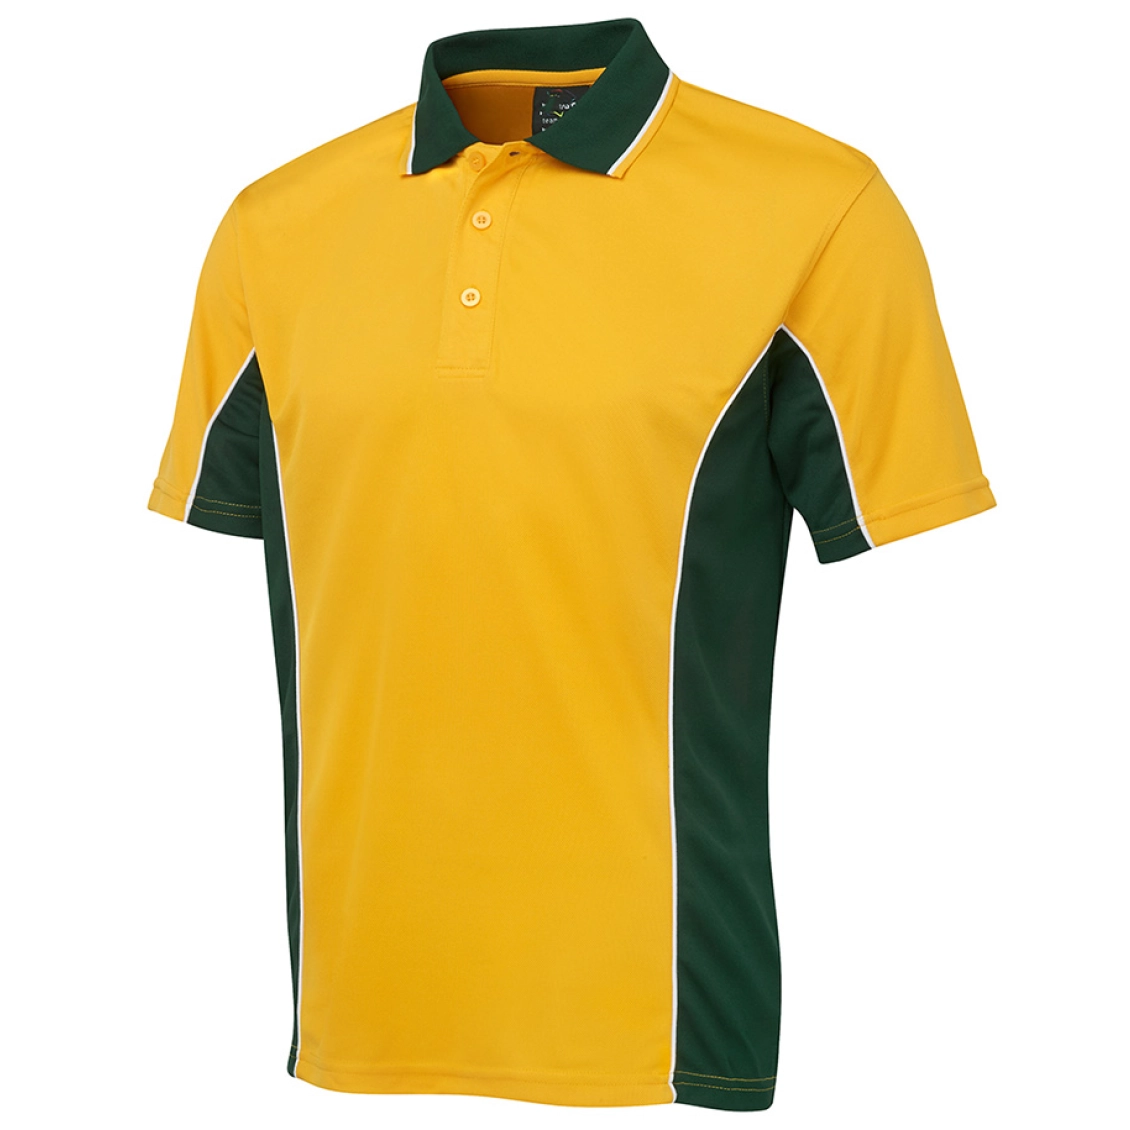 Trusted Dry Fit Polo Shirts Manufacturer Supplier Wholesale Blank T Shirts Supplier Manufacturer